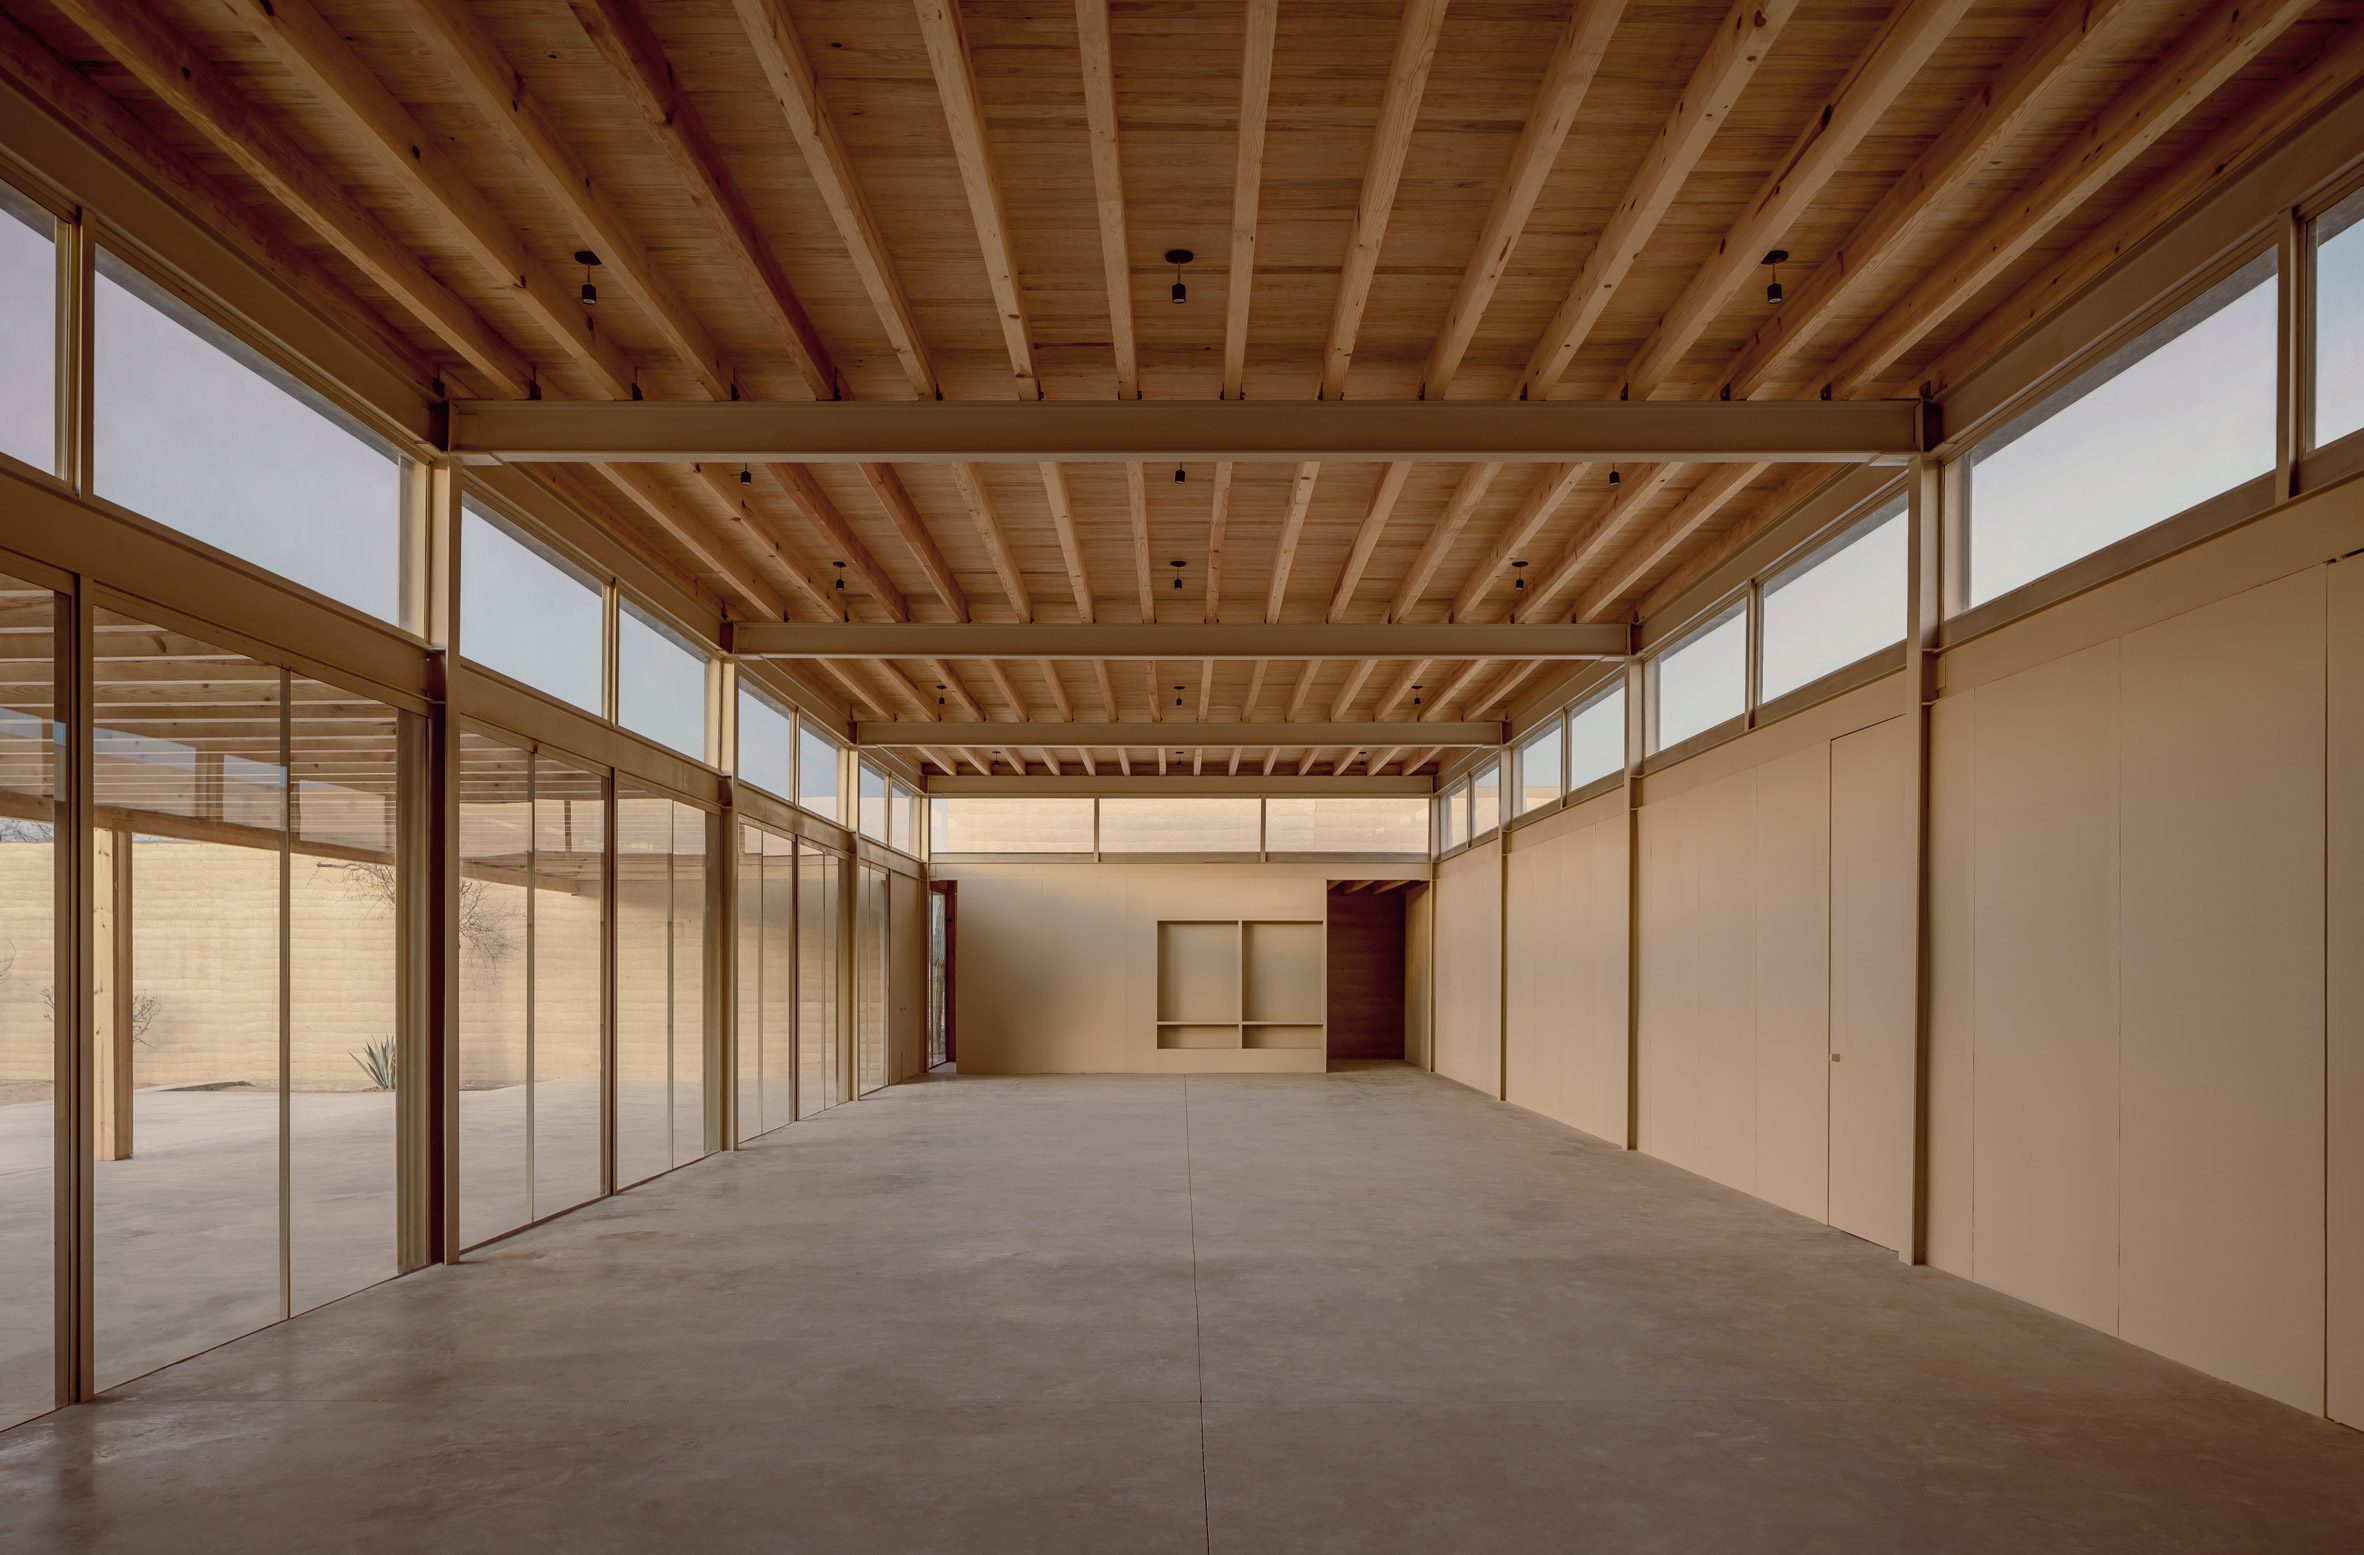 Wooden beams at sports complex by Taller Héctor Barroso